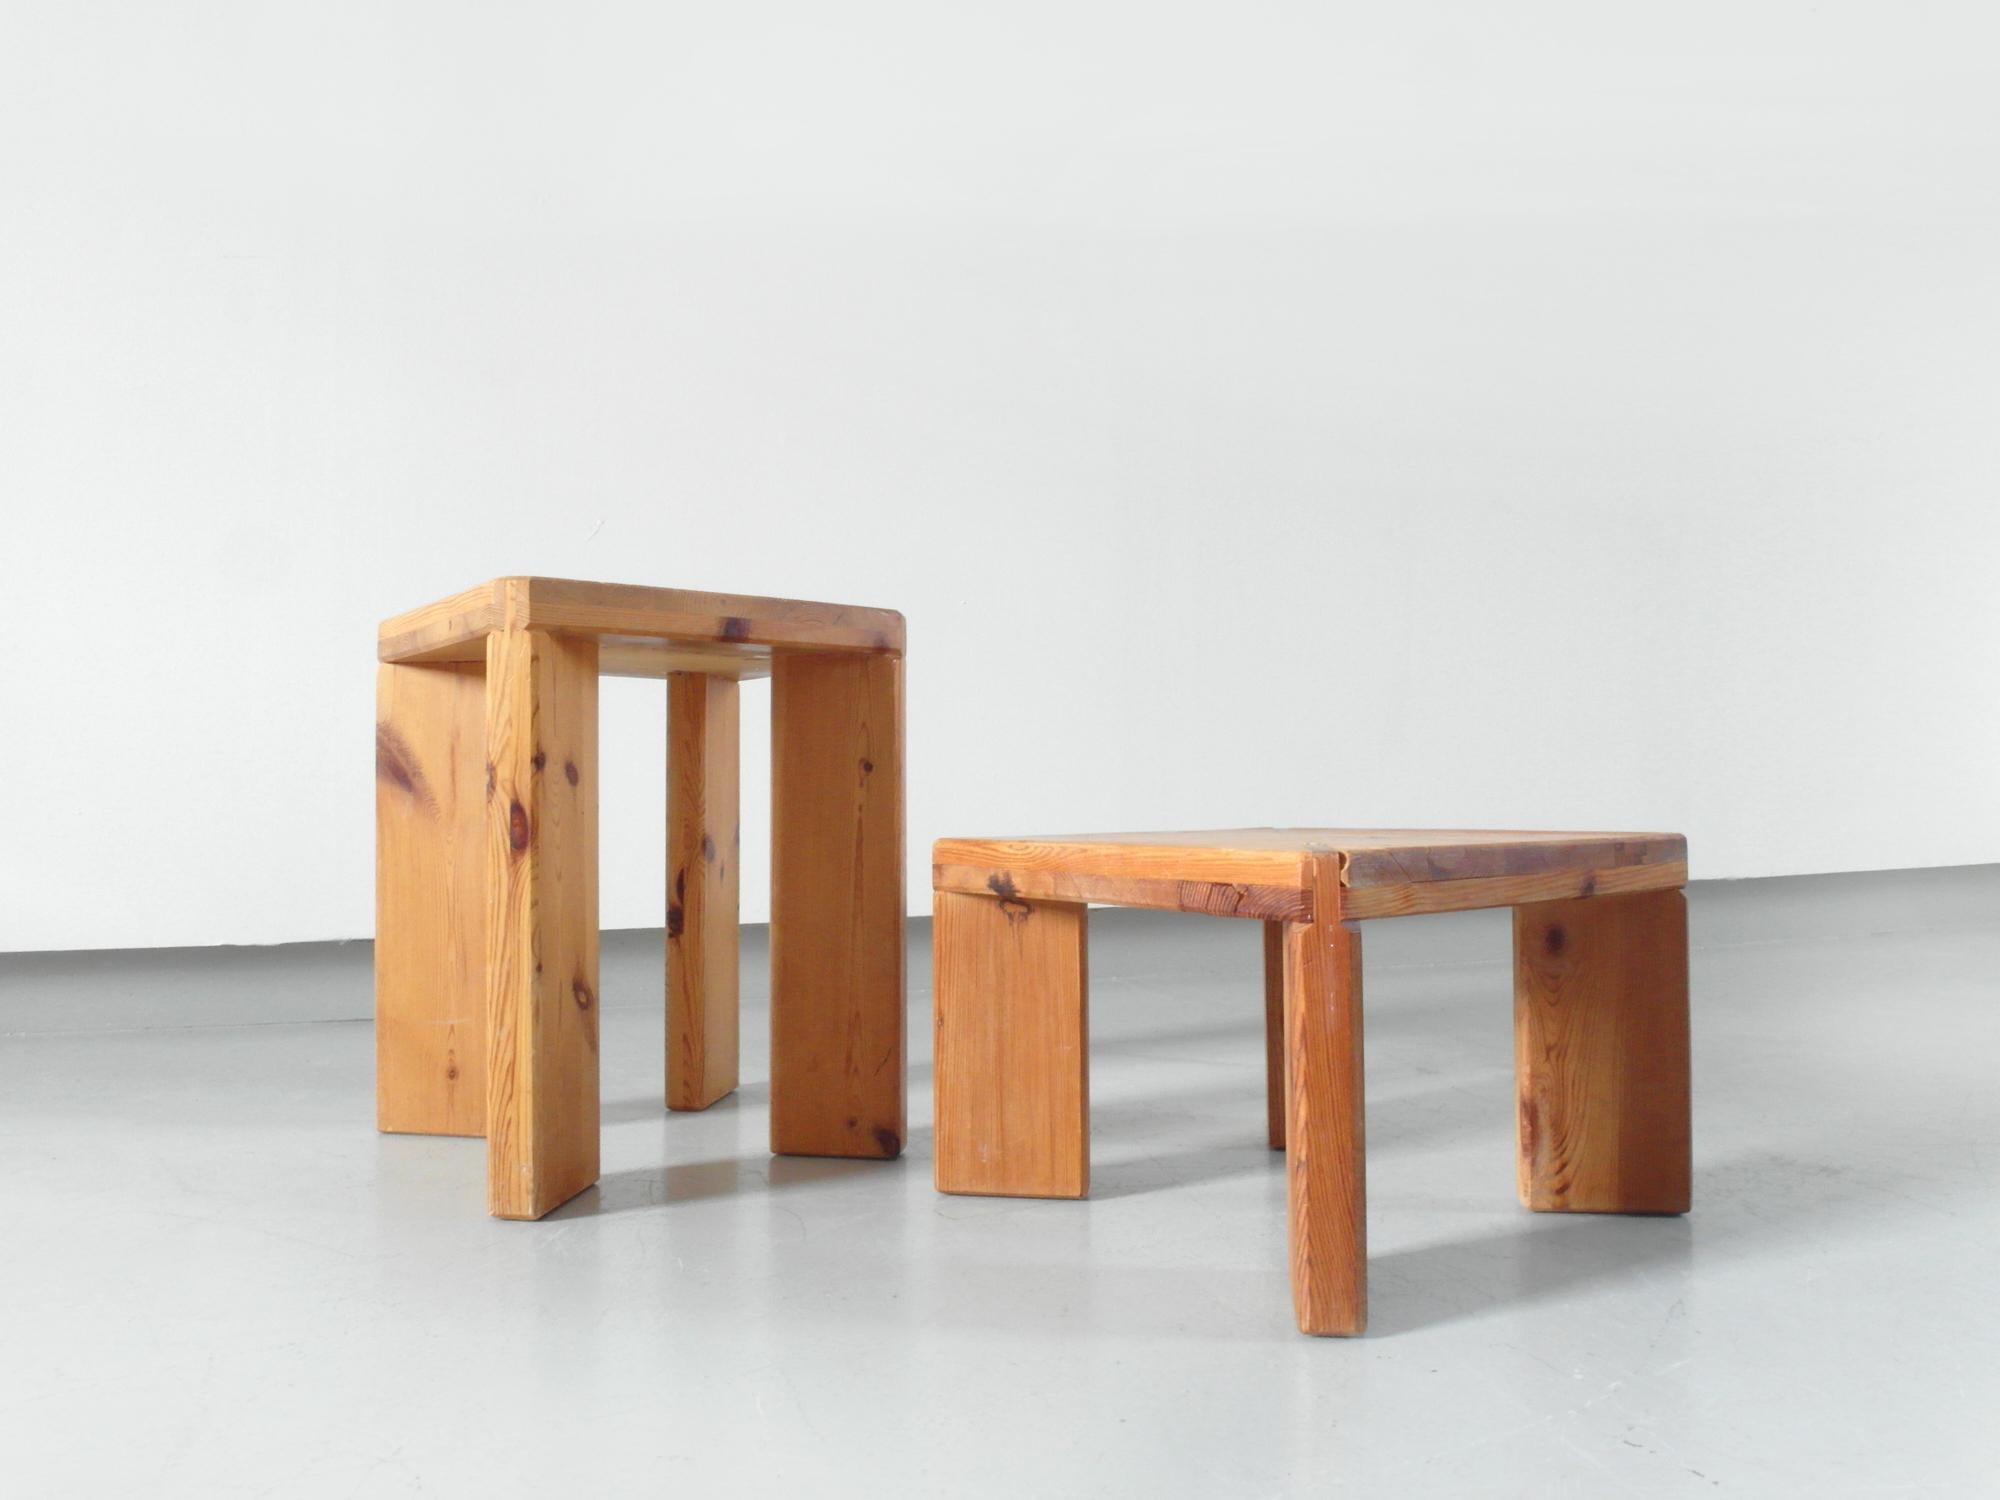 Roland Wilhelmsson, Unique Pair of Signed Stools, Studio of Artist 1965 and 1970 For Sale 10